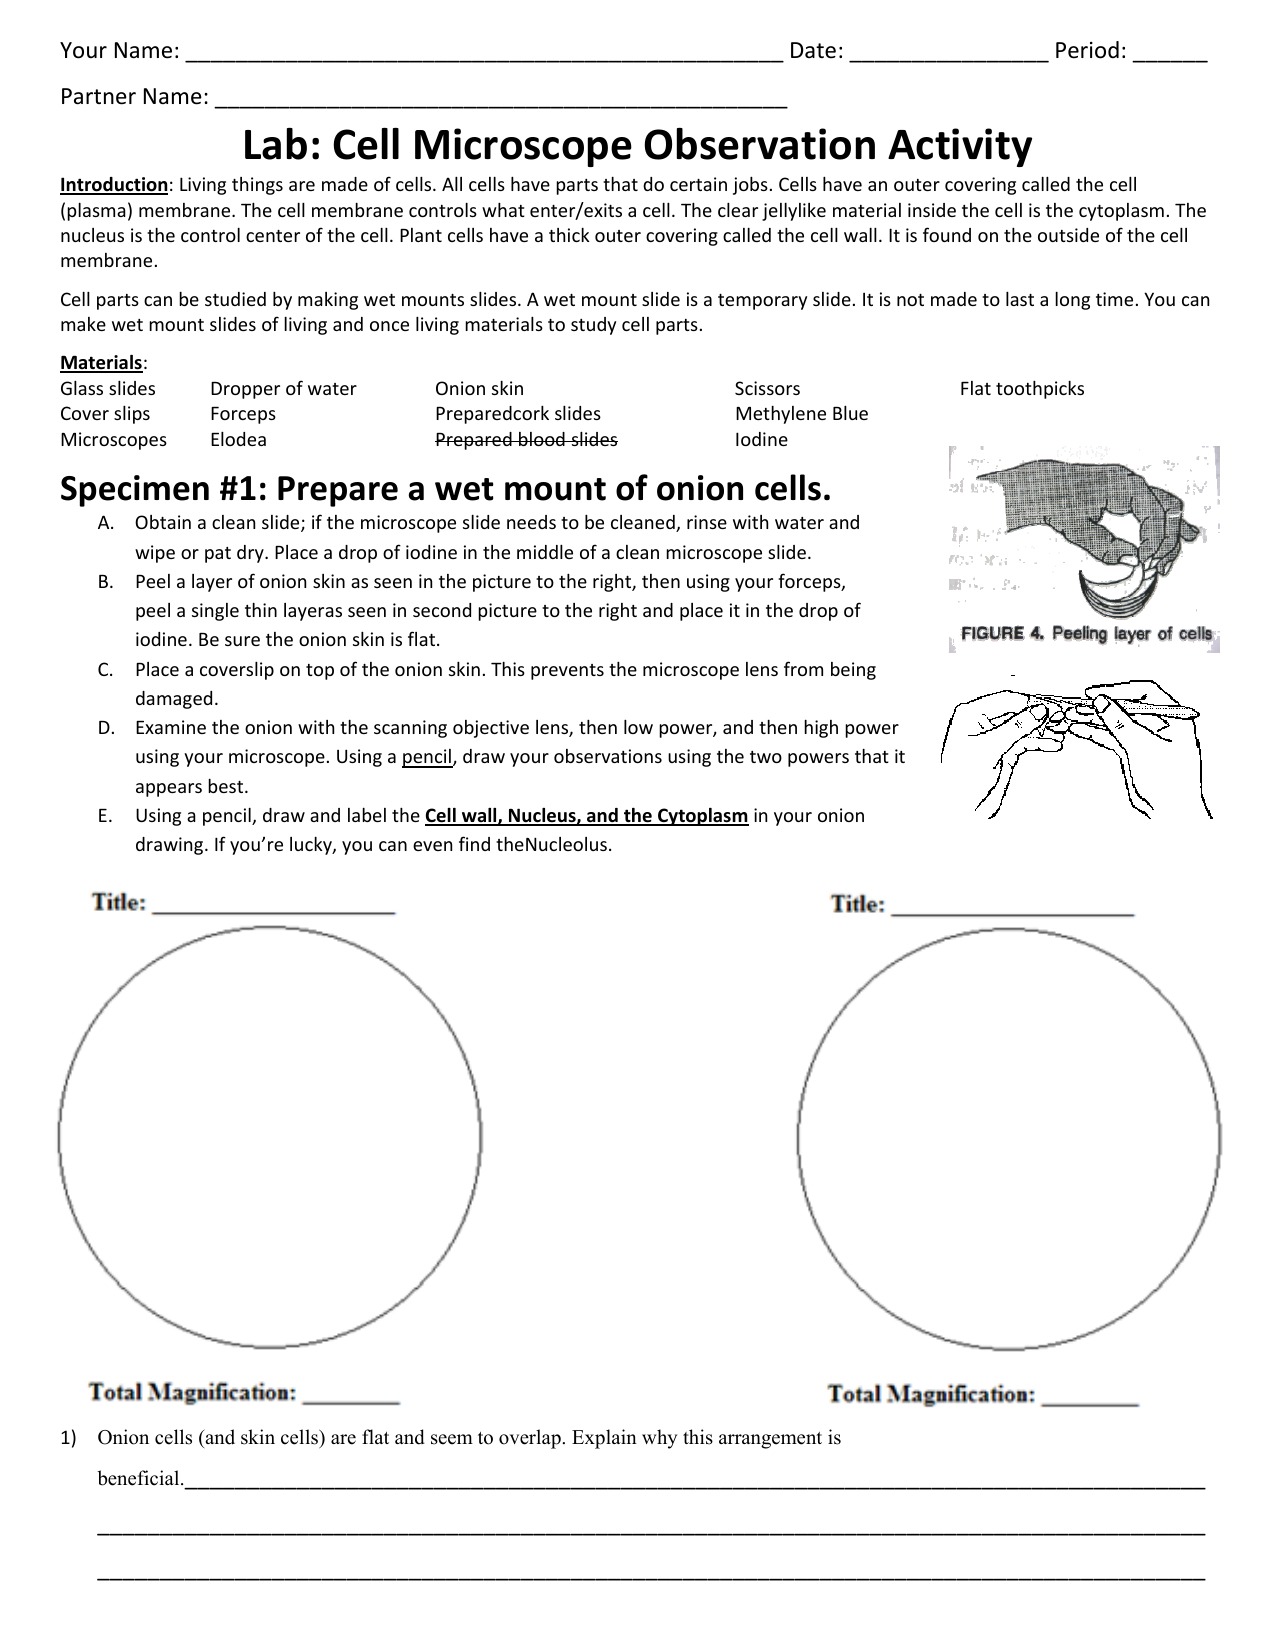 microscope-observation-worksheet-free-download-gmbar-co